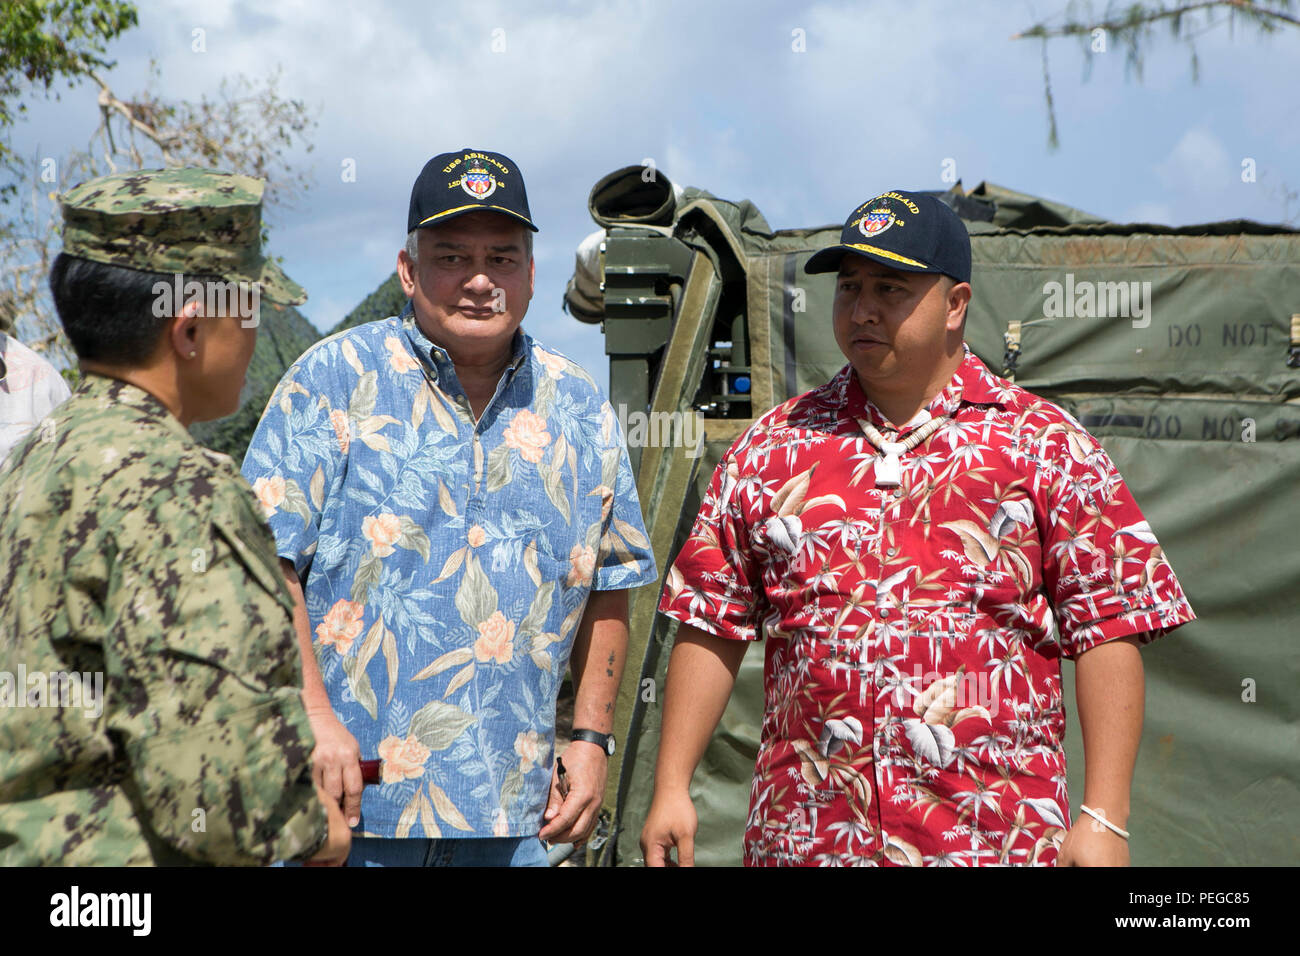 U.S. Navy Rear Adm. Bette Bolivar, commander of U.S. Naval Forces Marianas, speaks with U.S. Congressman Gregorio Kilili Camacho Sablan and Lieutenant Governor Ralph Torres as they tour a water purification site in Saipan, Aug. 11, 2015. The water purification site was set up by the Marines of Combat Logistics Battalion 31, 31st Marine Expeditionary Unit, as part of typhoon relief efforts. The 31st MEU and the ships of the Bonhomme Richard Amphibious Ready Group are assisting the Federal Emergency Management Agency with distributing emergency relief supplies to Saipan after the island was stru Stock Photo